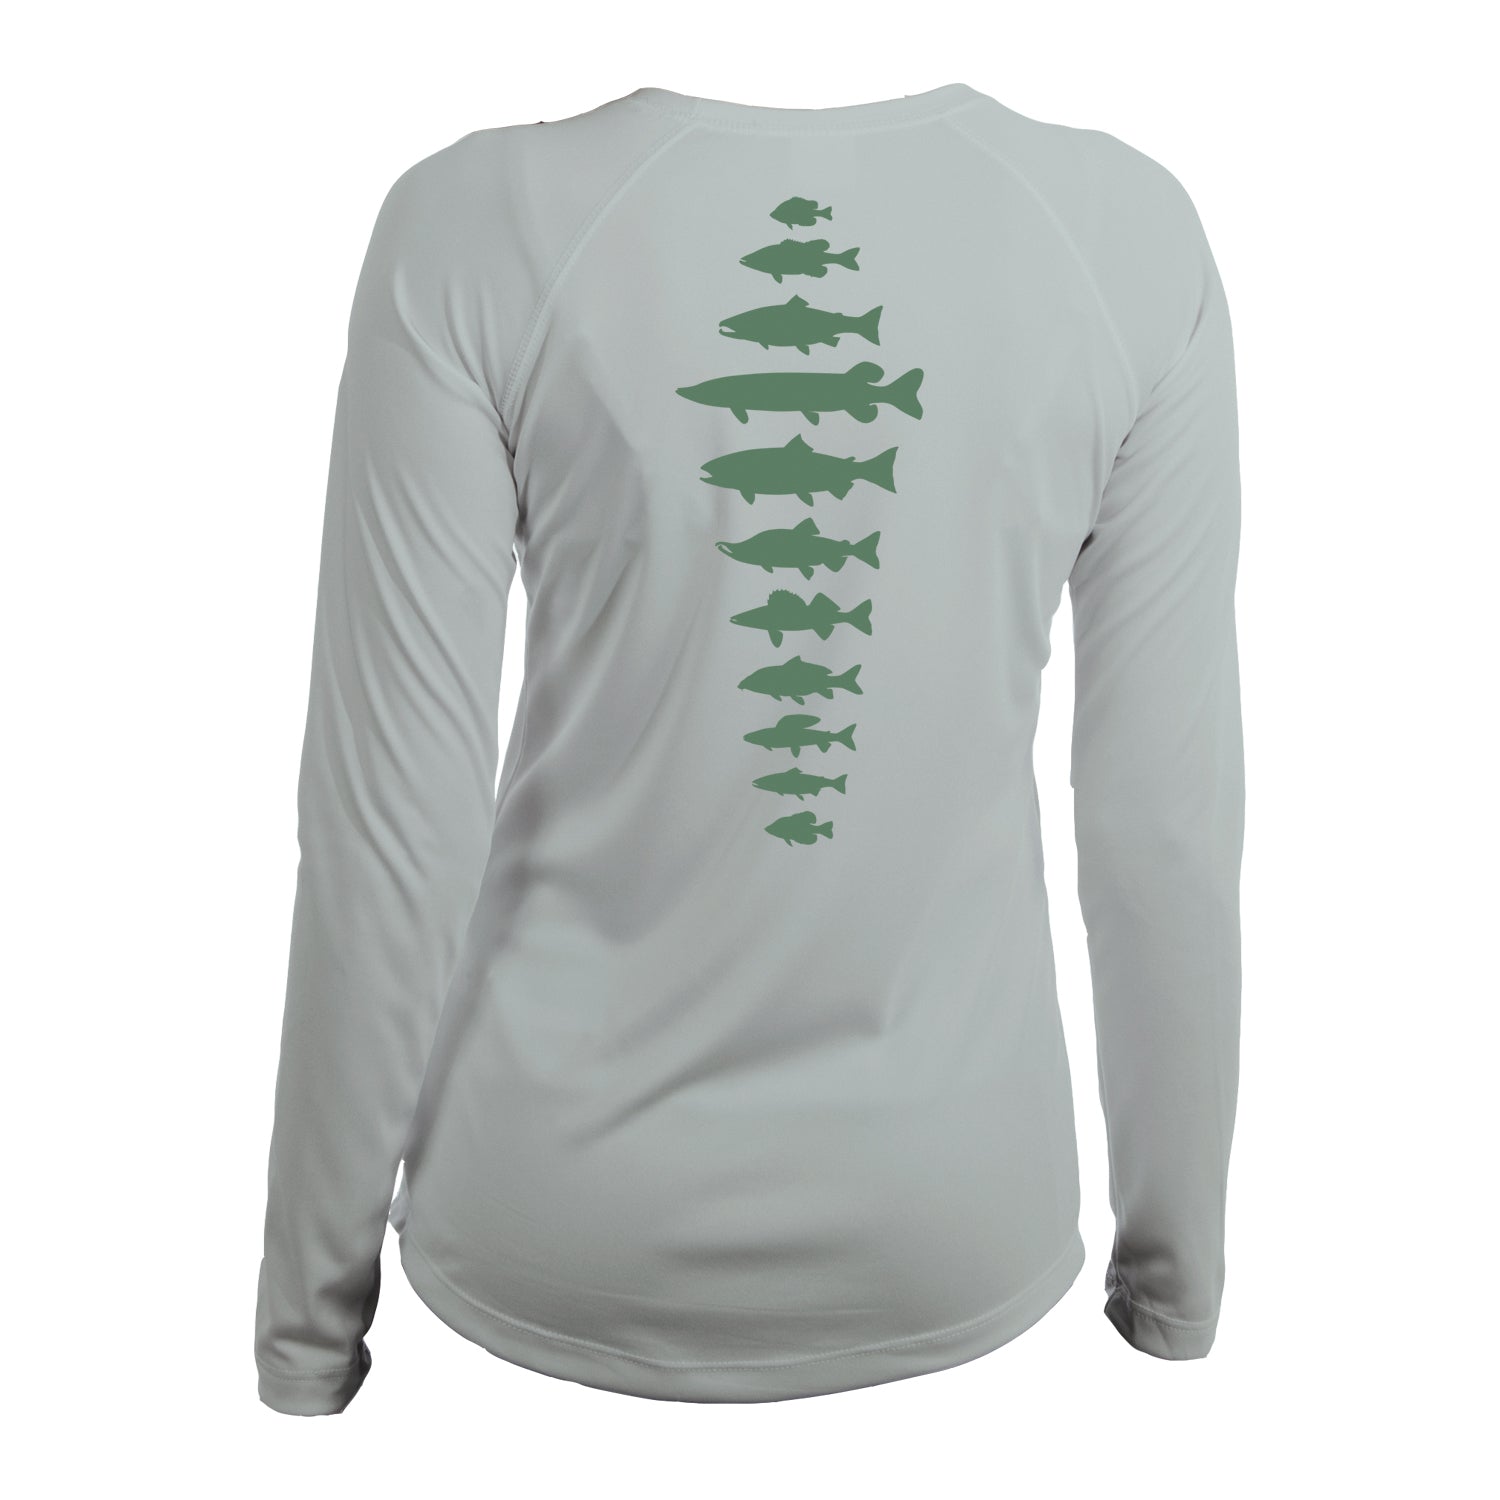 backside of gray sun shirt with freshwater fish species silhouettes going down the spine in green